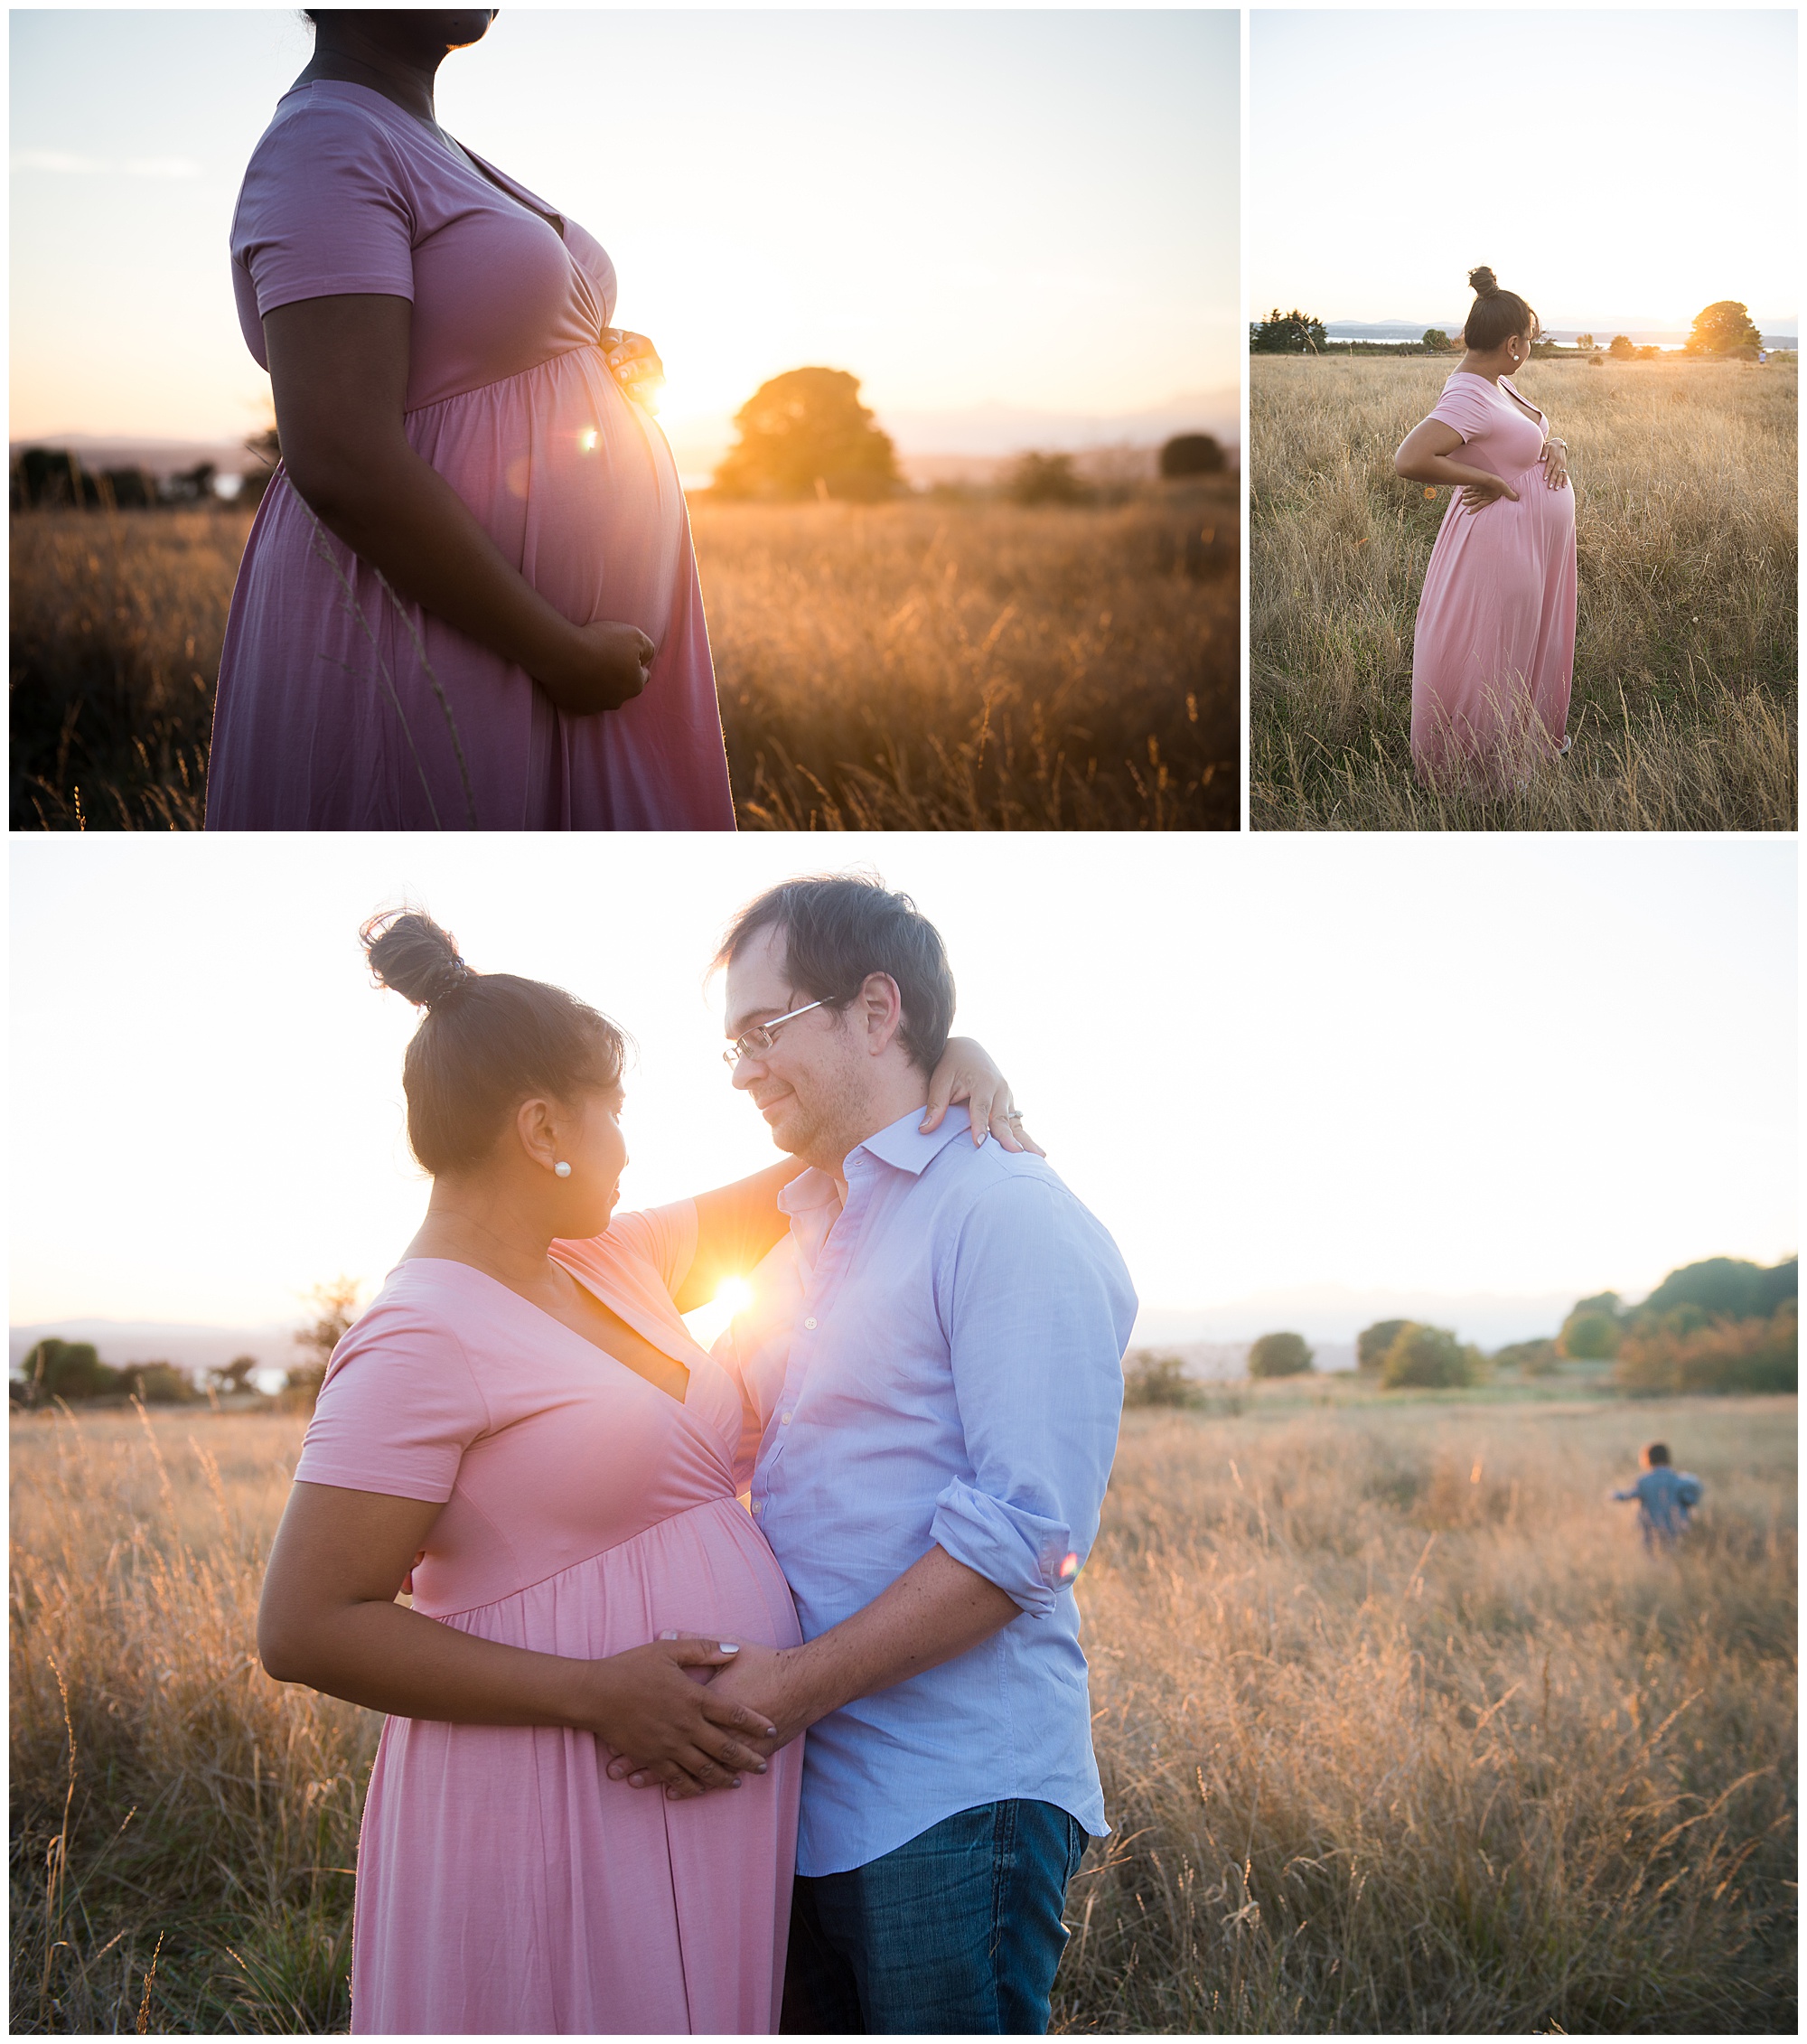 Collage of Outdoor Maternity Photoshoot In Field at Sunset Pink Dress Pregnant Family with little Boy Emily Ann Photography Seattle Photographer